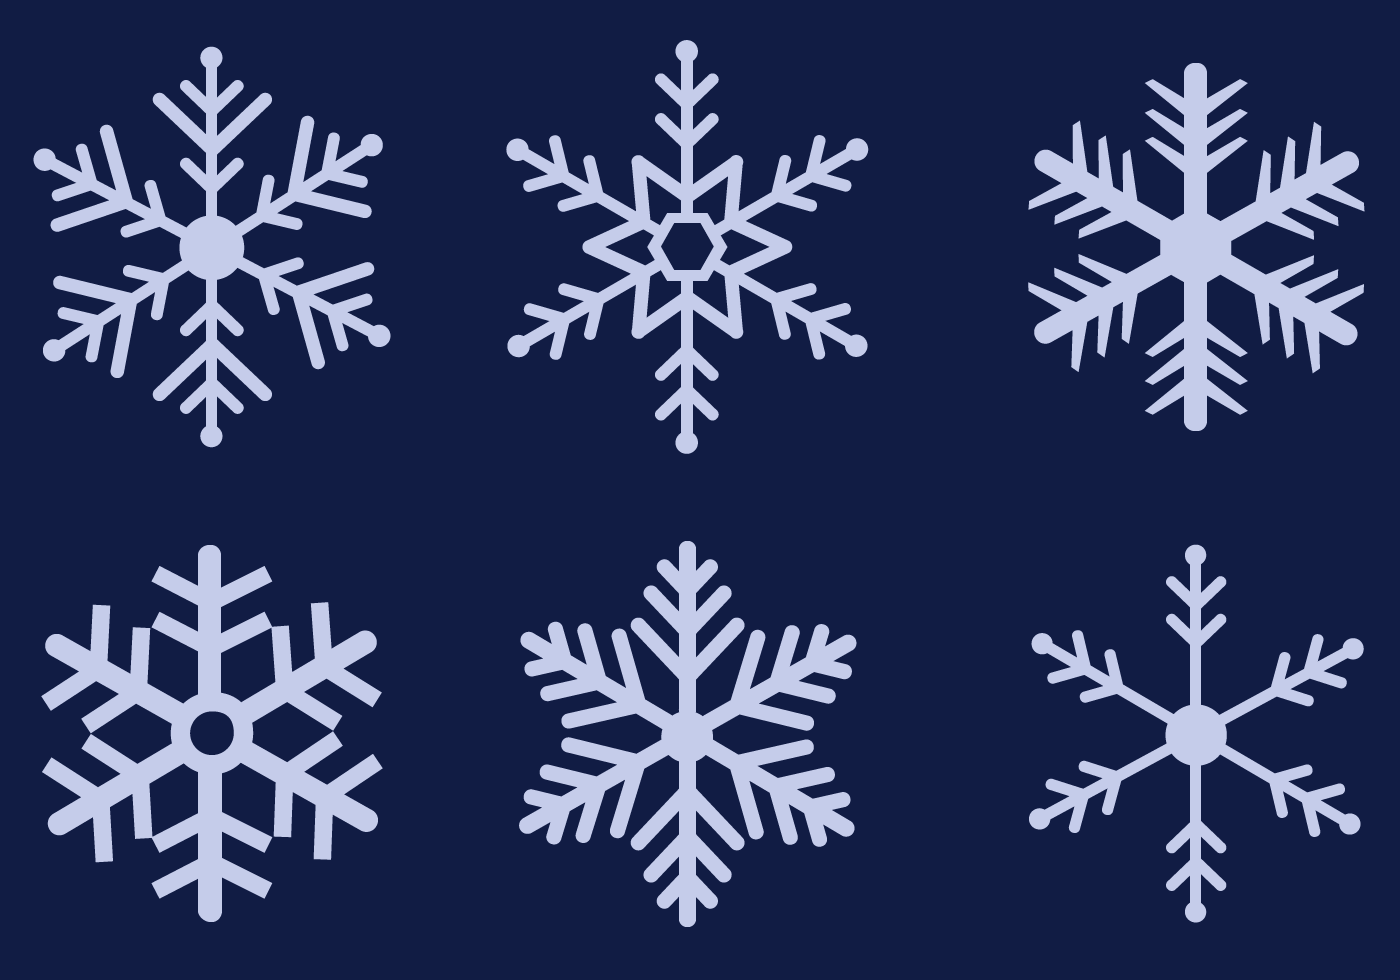 Download Snowflakes Vector - Download Free Vector Art, Stock Graphics & Images